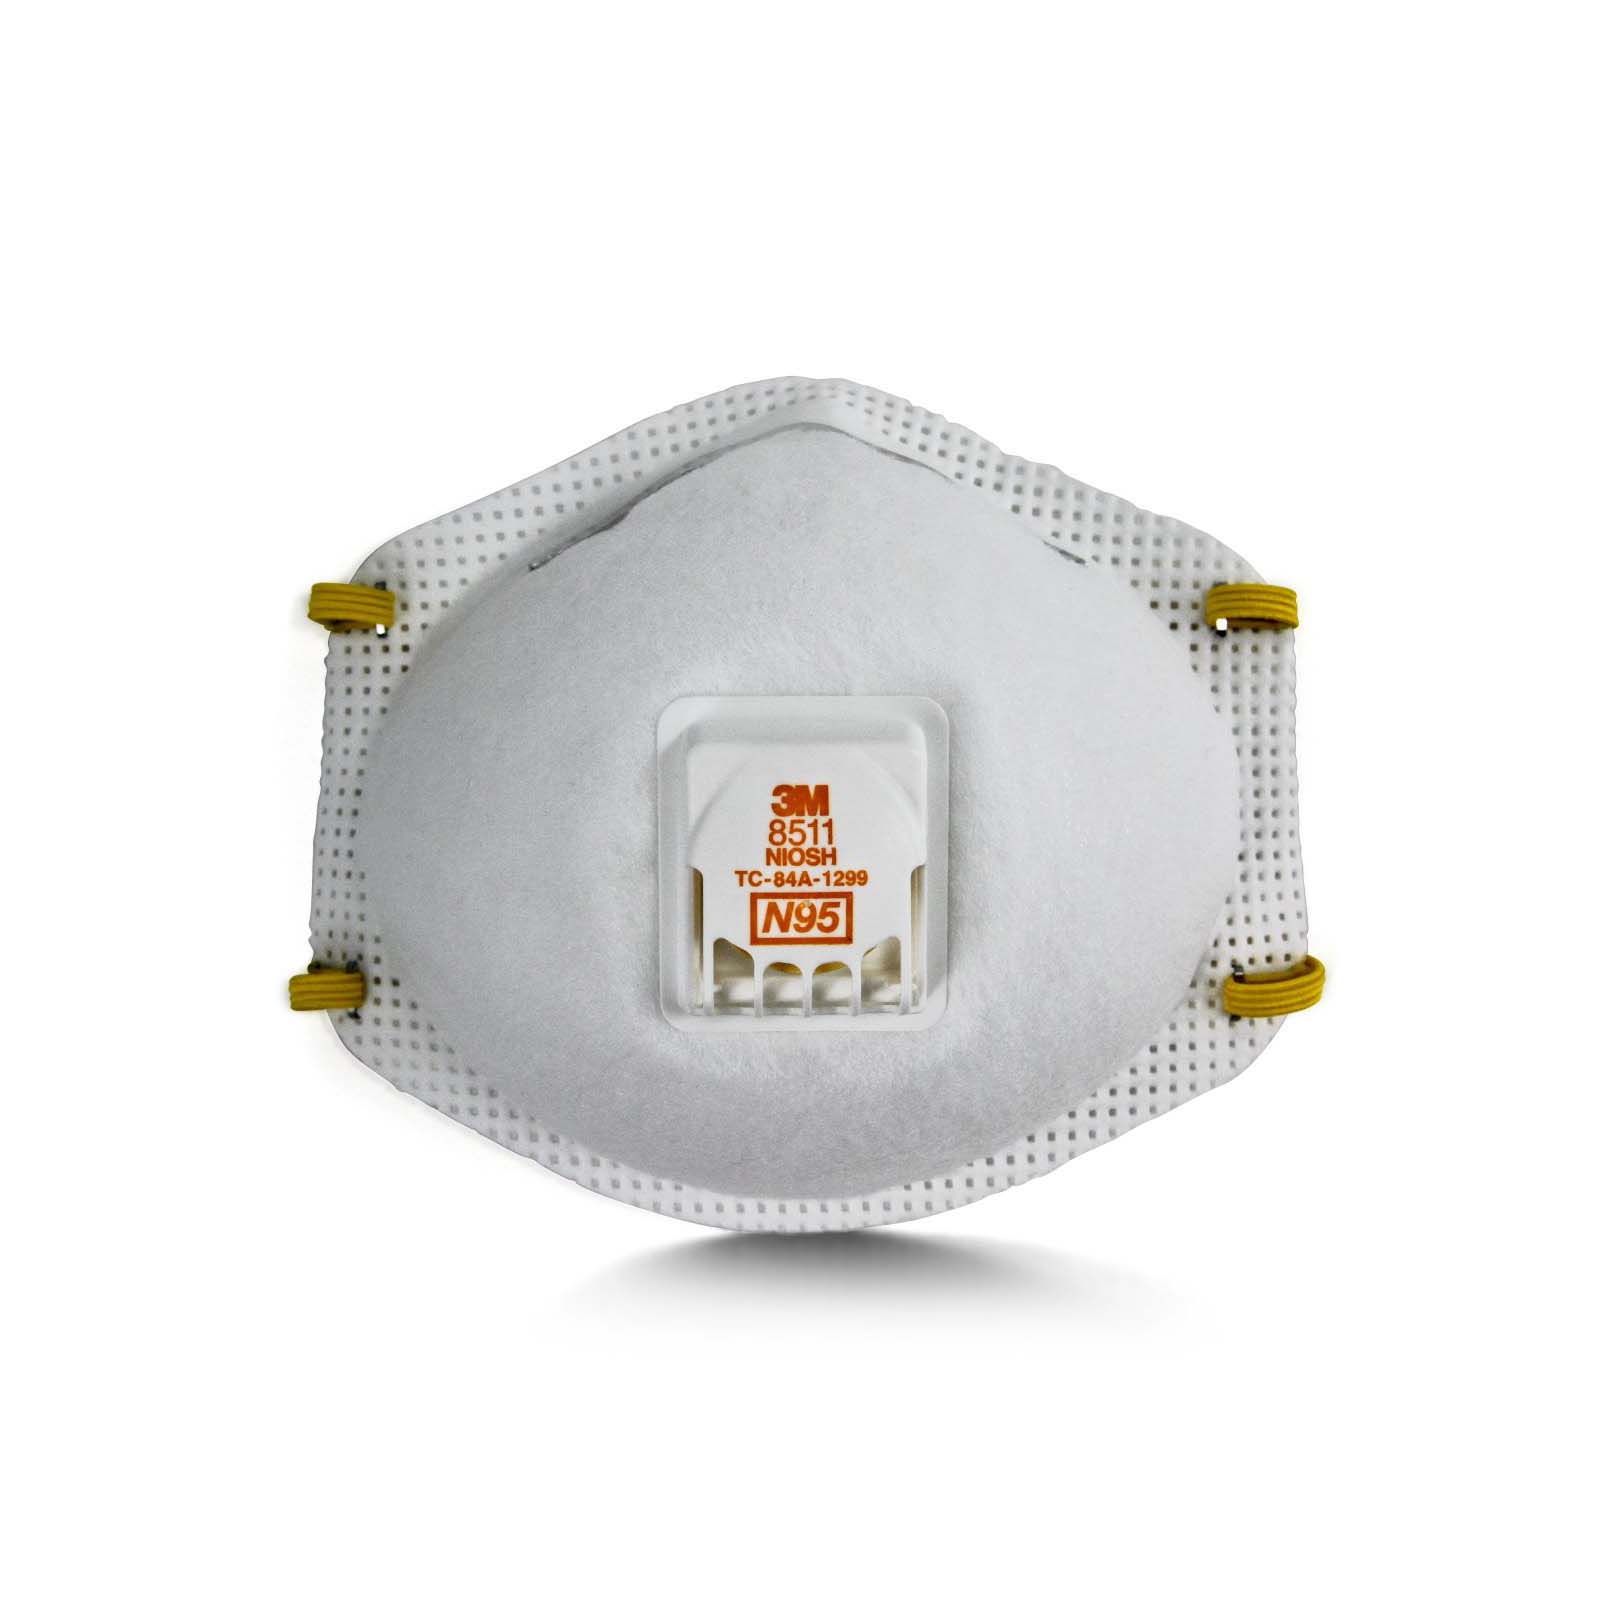  3M™ N95 Disposable Particulate Respirator With Cool Flow™ Exhalation Valve (8511) 